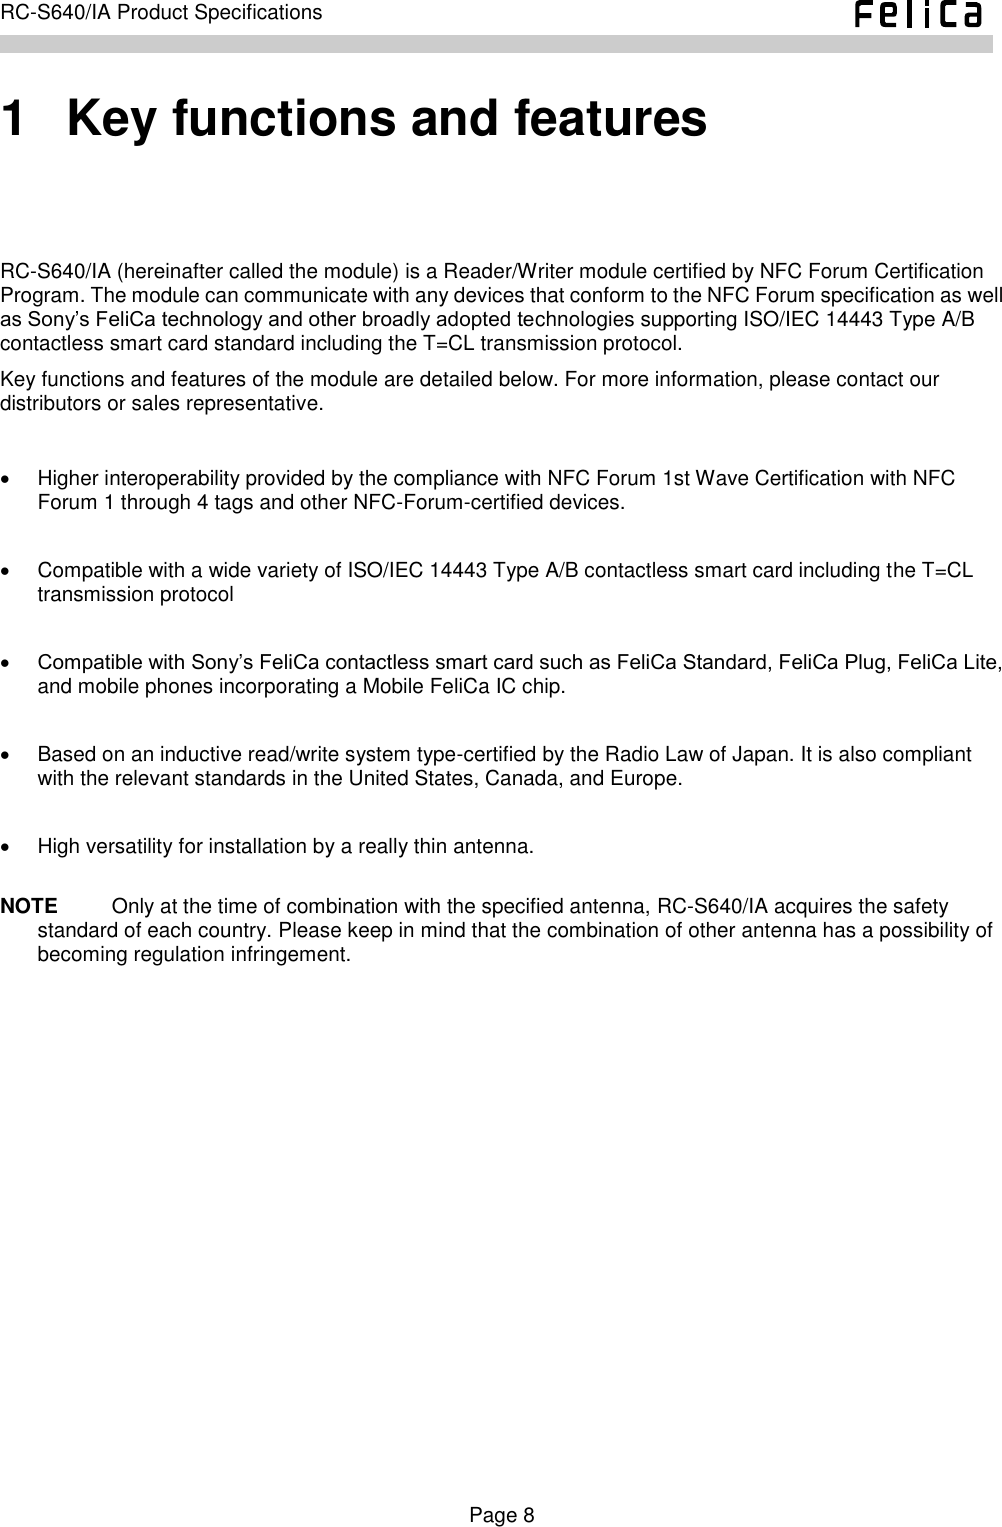    Page 8     RC-S640/IA Product Specifications    1   Key functions and features RC-S640/IA (hereinafter called the module) is a Reader/Writer module certified by NFC Forum Certification Program. The module can communicate with any devices that conform to the NFC Forum specification as well as Sony’s FeliCa technology and other broadly adopted technologies supporting ISO/IEC 14443 Type A/B contactless smart card standard including the T=CL transmission protocol. Key functions and features of the module are detailed below. For more information, please contact our distributors or sales representative.    Higher interoperability provided by the compliance with NFC Forum 1st Wave Certification with NFC Forum 1 through 4 tags and other NFC-Forum-certified devices.    Compatible with a wide variety of ISO/IEC 14443 Type A/B contactless smart card including the T=CL transmission protocol     Compatible with Sony’s FeliCa contactless smart card such as FeliCa Standard, FeliCa Plug, FeliCa Lite, and mobile phones incorporating a Mobile FeliCa IC chip.      Based on an inductive read/write system type-certified by the Radio Law of Japan. It is also compliant with the relevant standards in the United States, Canada, and Europe.    High versatility for installation by a really thin antenna.  NOTE    Only at the time of combination with the specified antenna, RC-S640/IA acquires the safety standard of each country. Please keep in mind that the combination of other antenna has a possibility of becoming regulation infringement. 